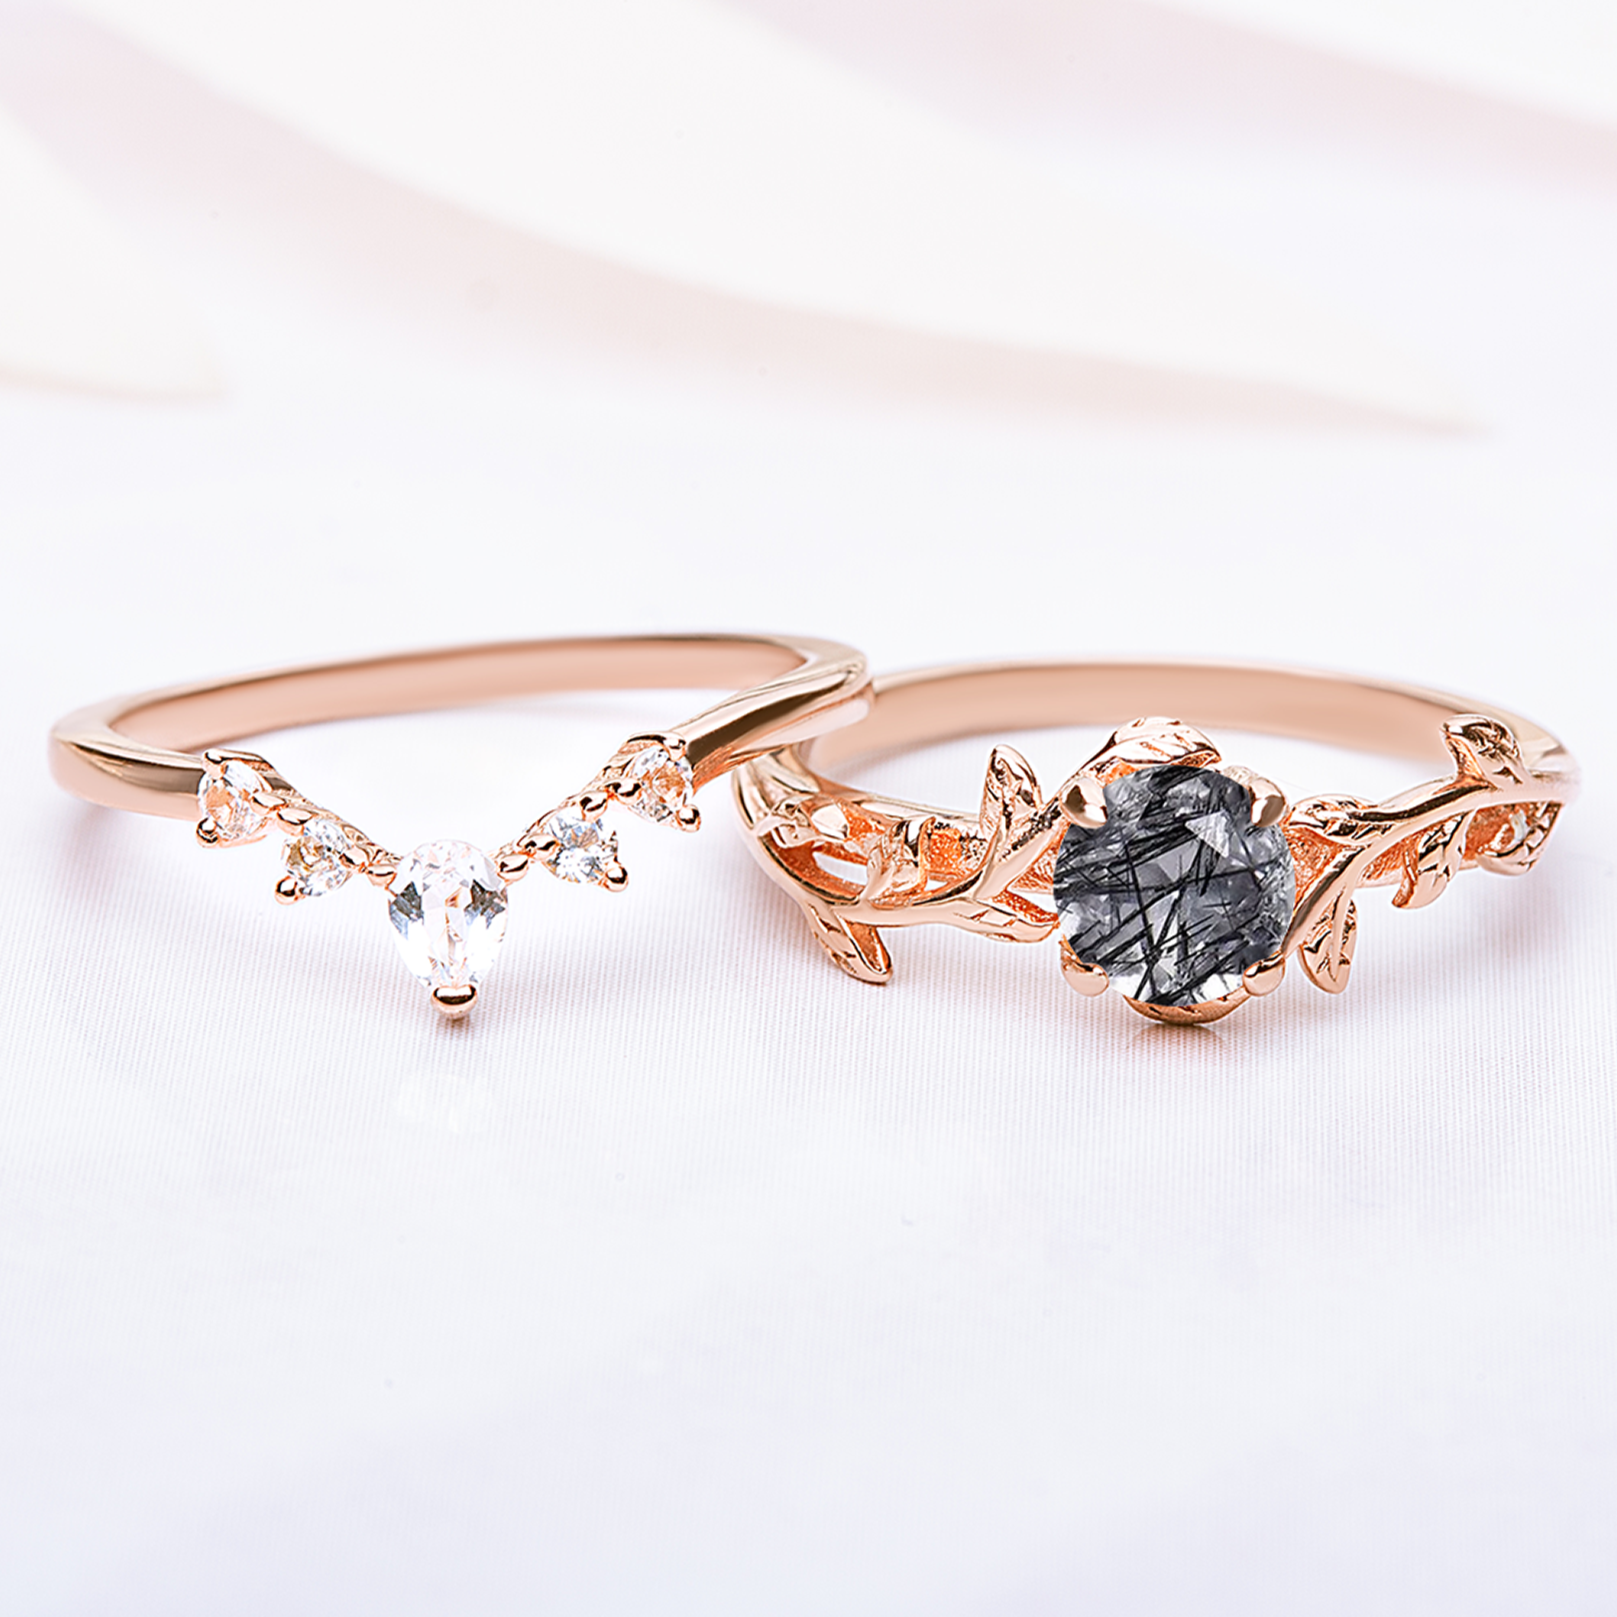 Ring set for women. One ring in a shape of twig with black quartz gemstone, another rings is in a v-shape with zircon gemstones. Rings are gold plated